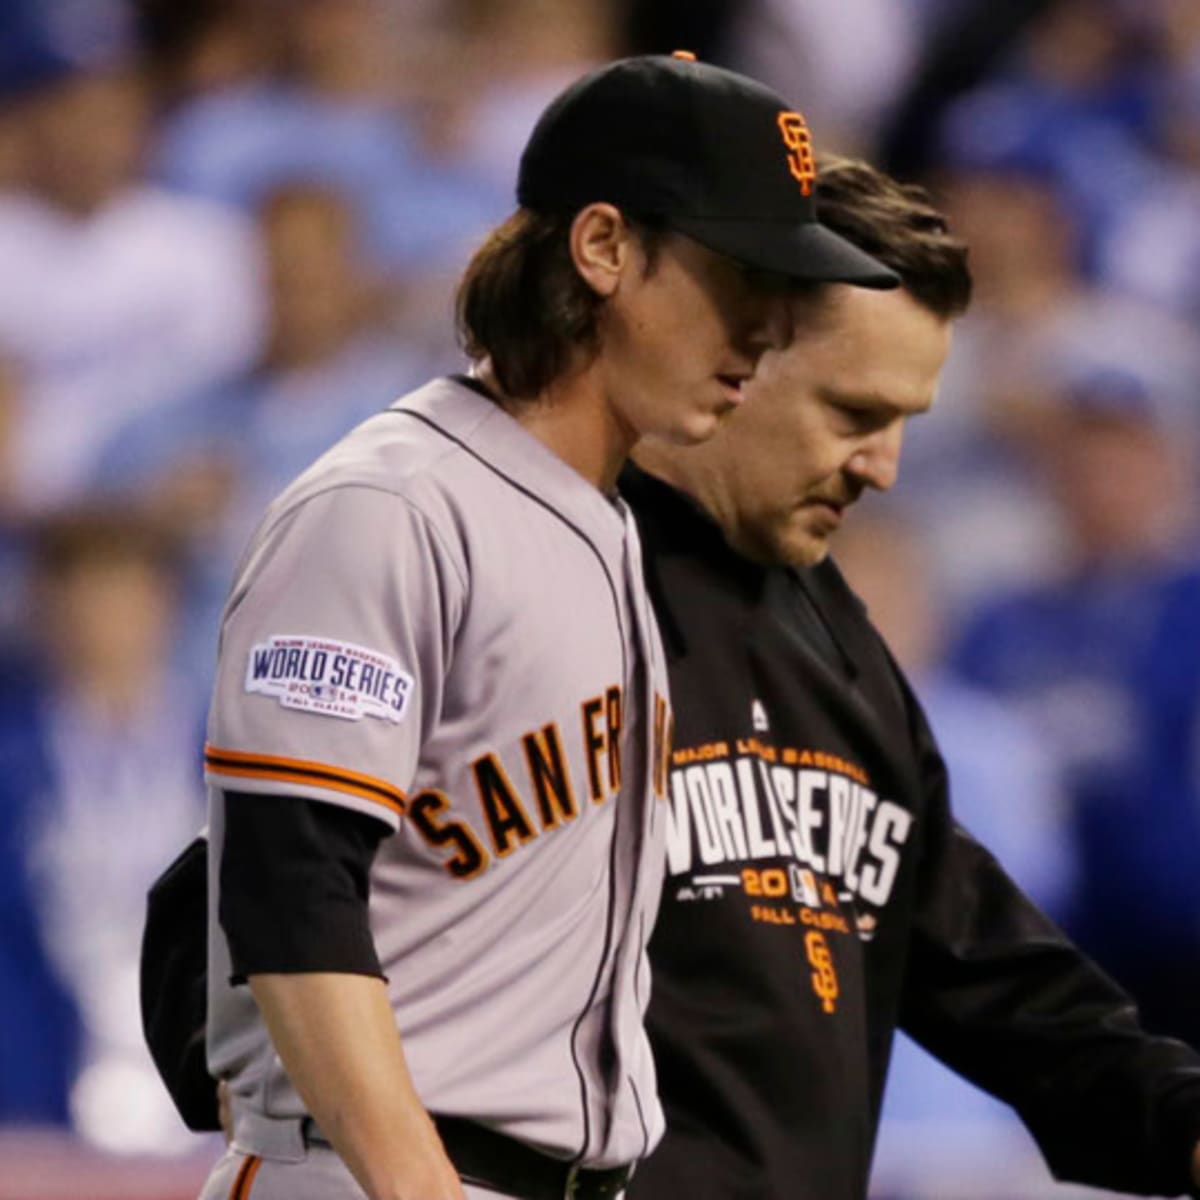 San Francisco Giants pitcher Tim Lincecum day-to-day with